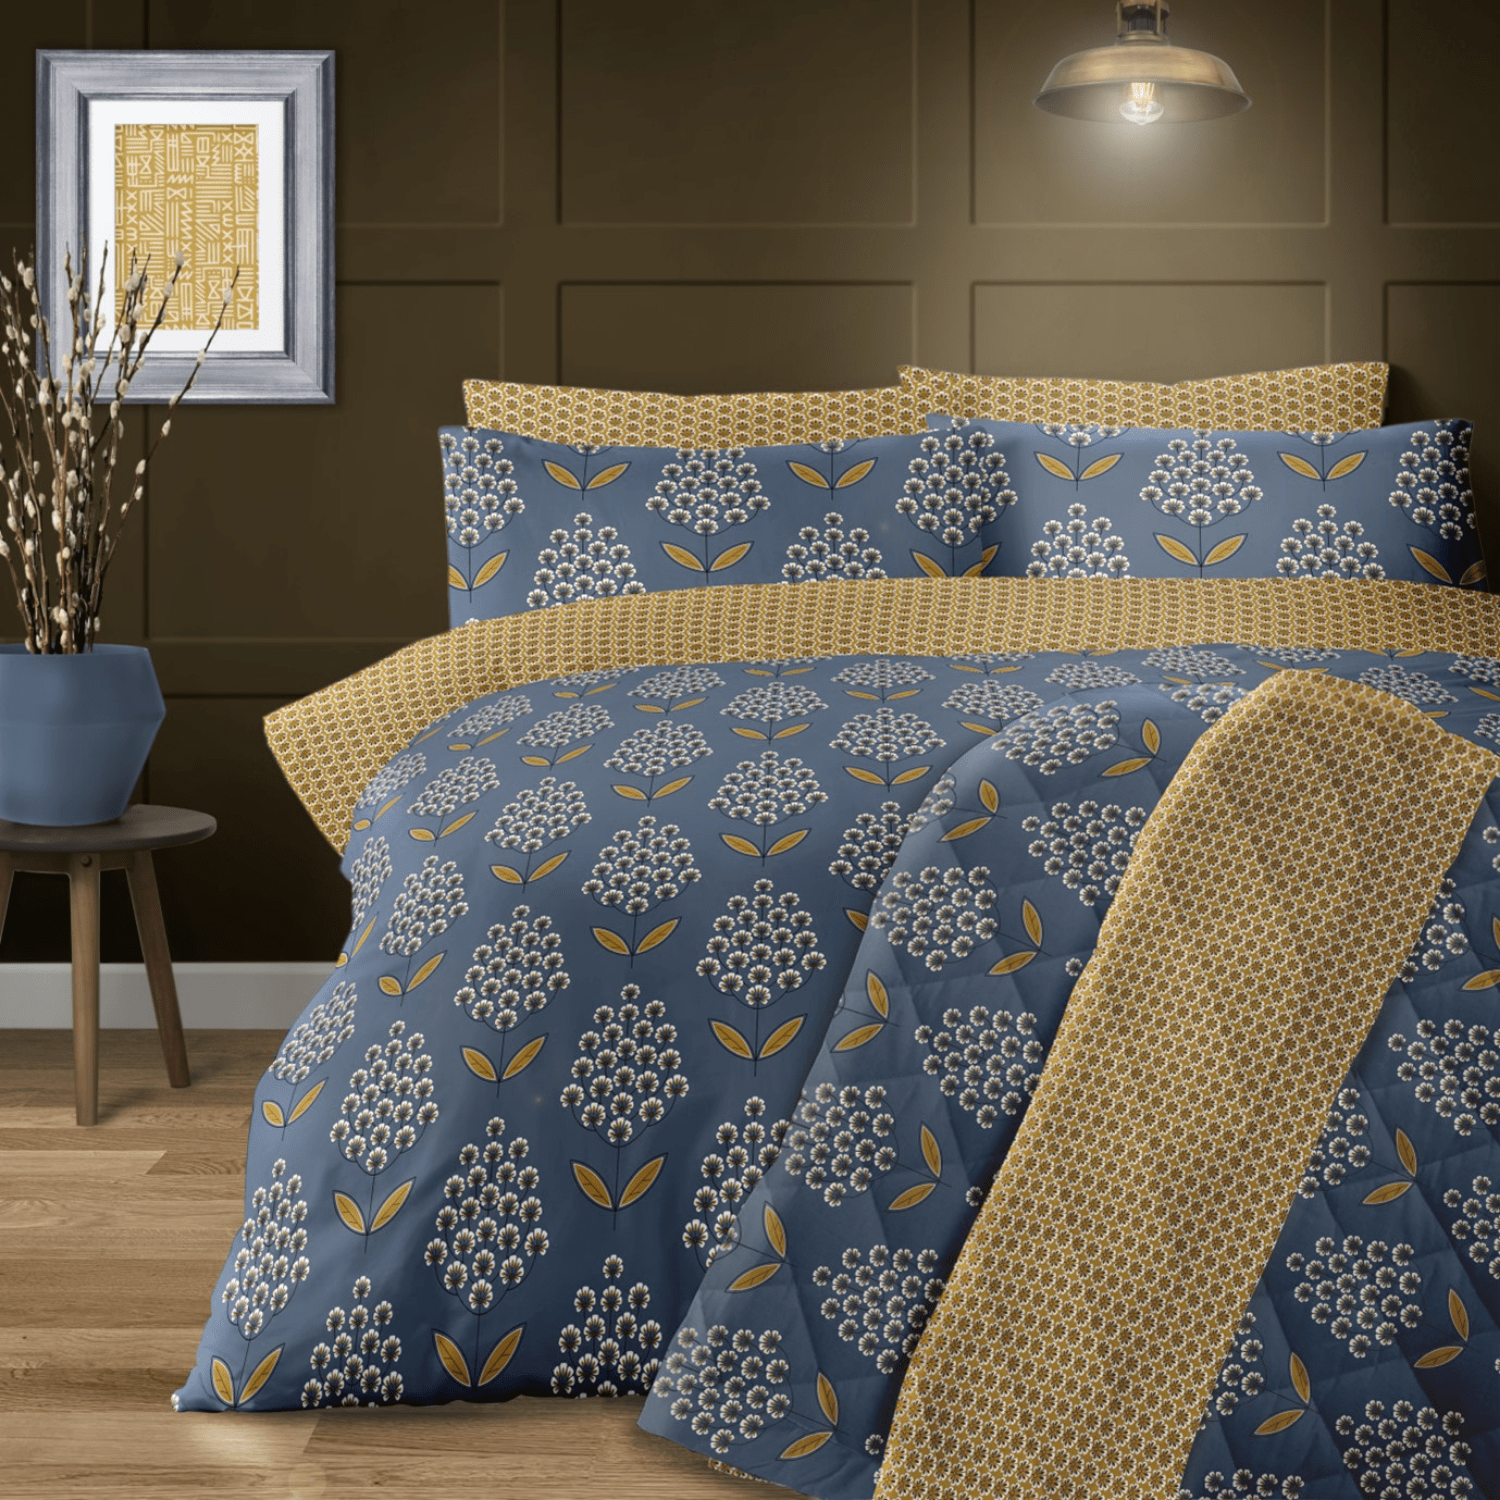  The Home Christine Duvet Cover Set 1 Shaws Department Stores